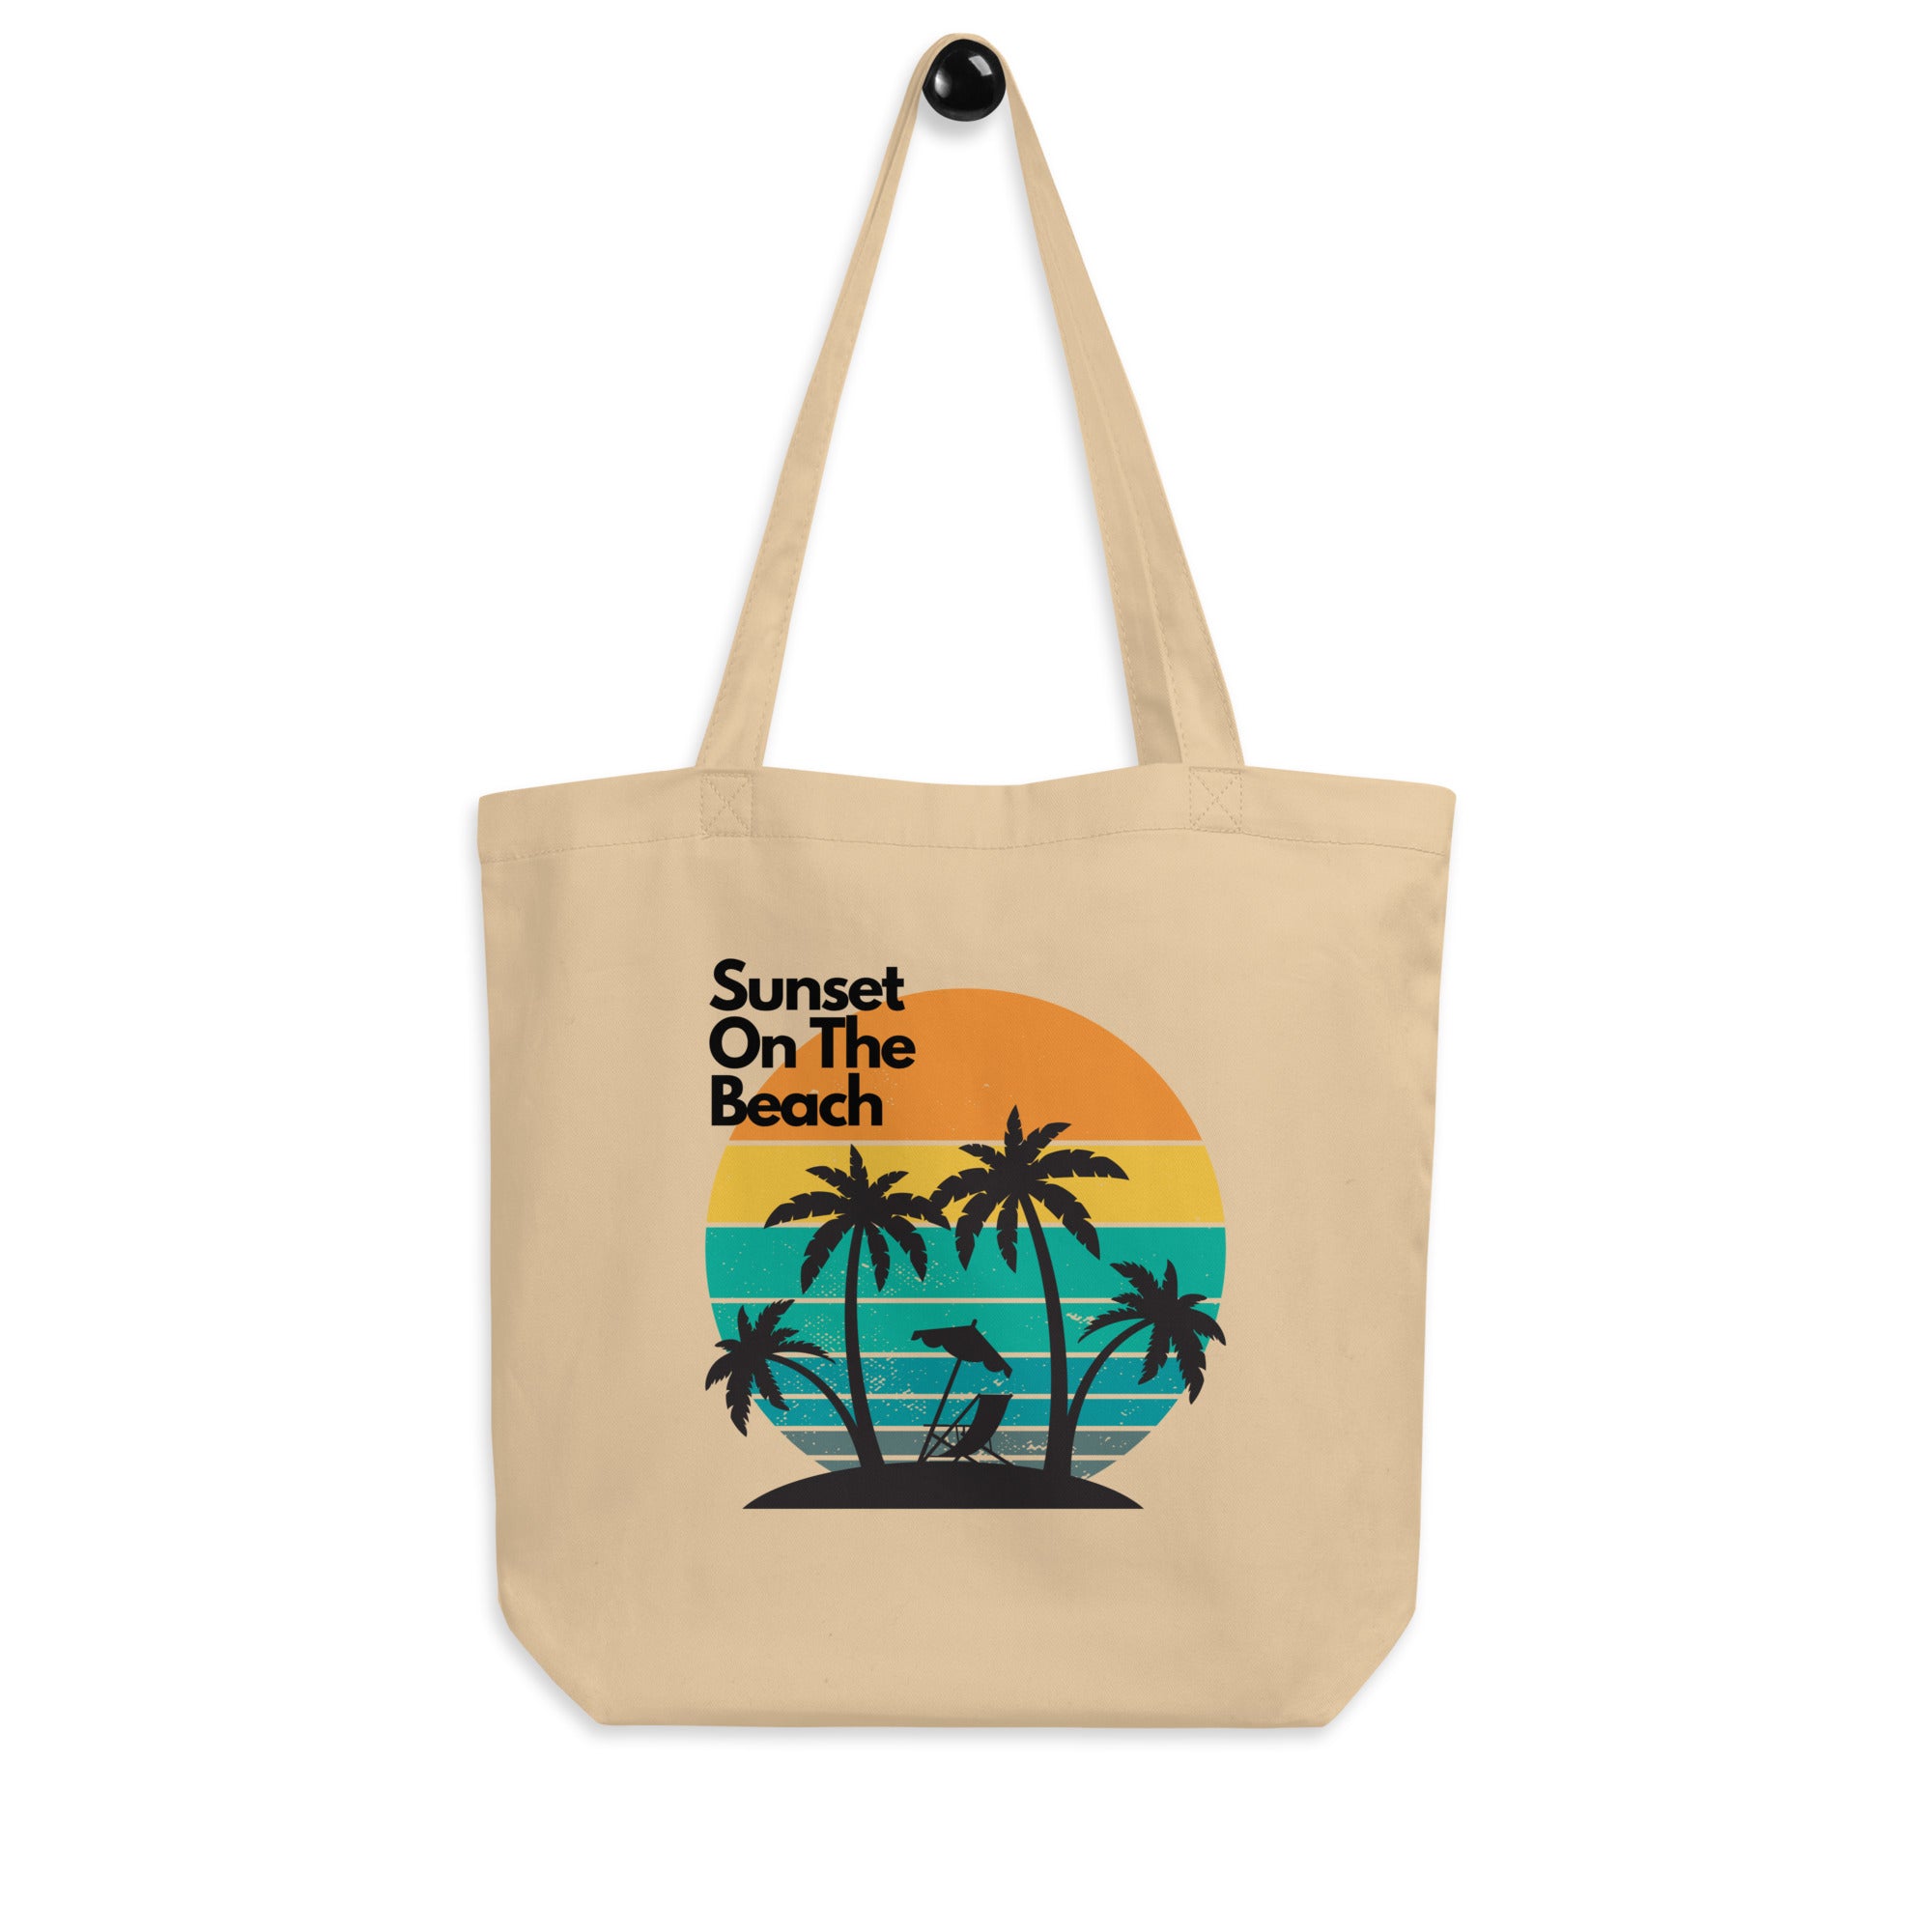 Sunset On The Beach - Tote Bag